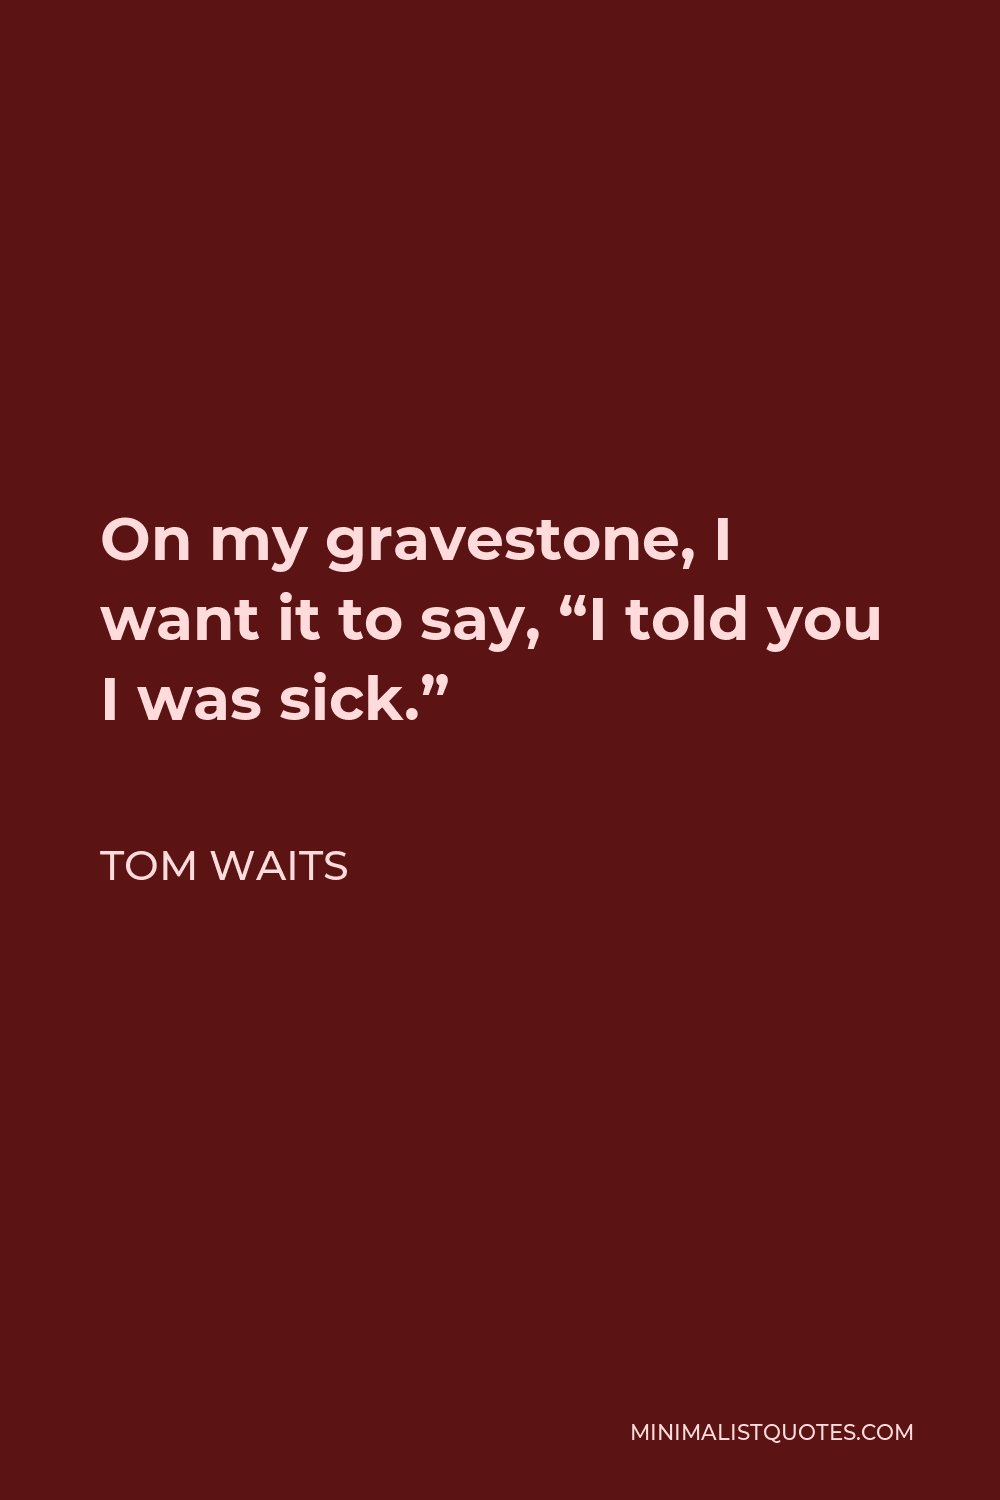 Tom Waits Quote - On my gravestone, I want it to say, “I told you I was sick.”